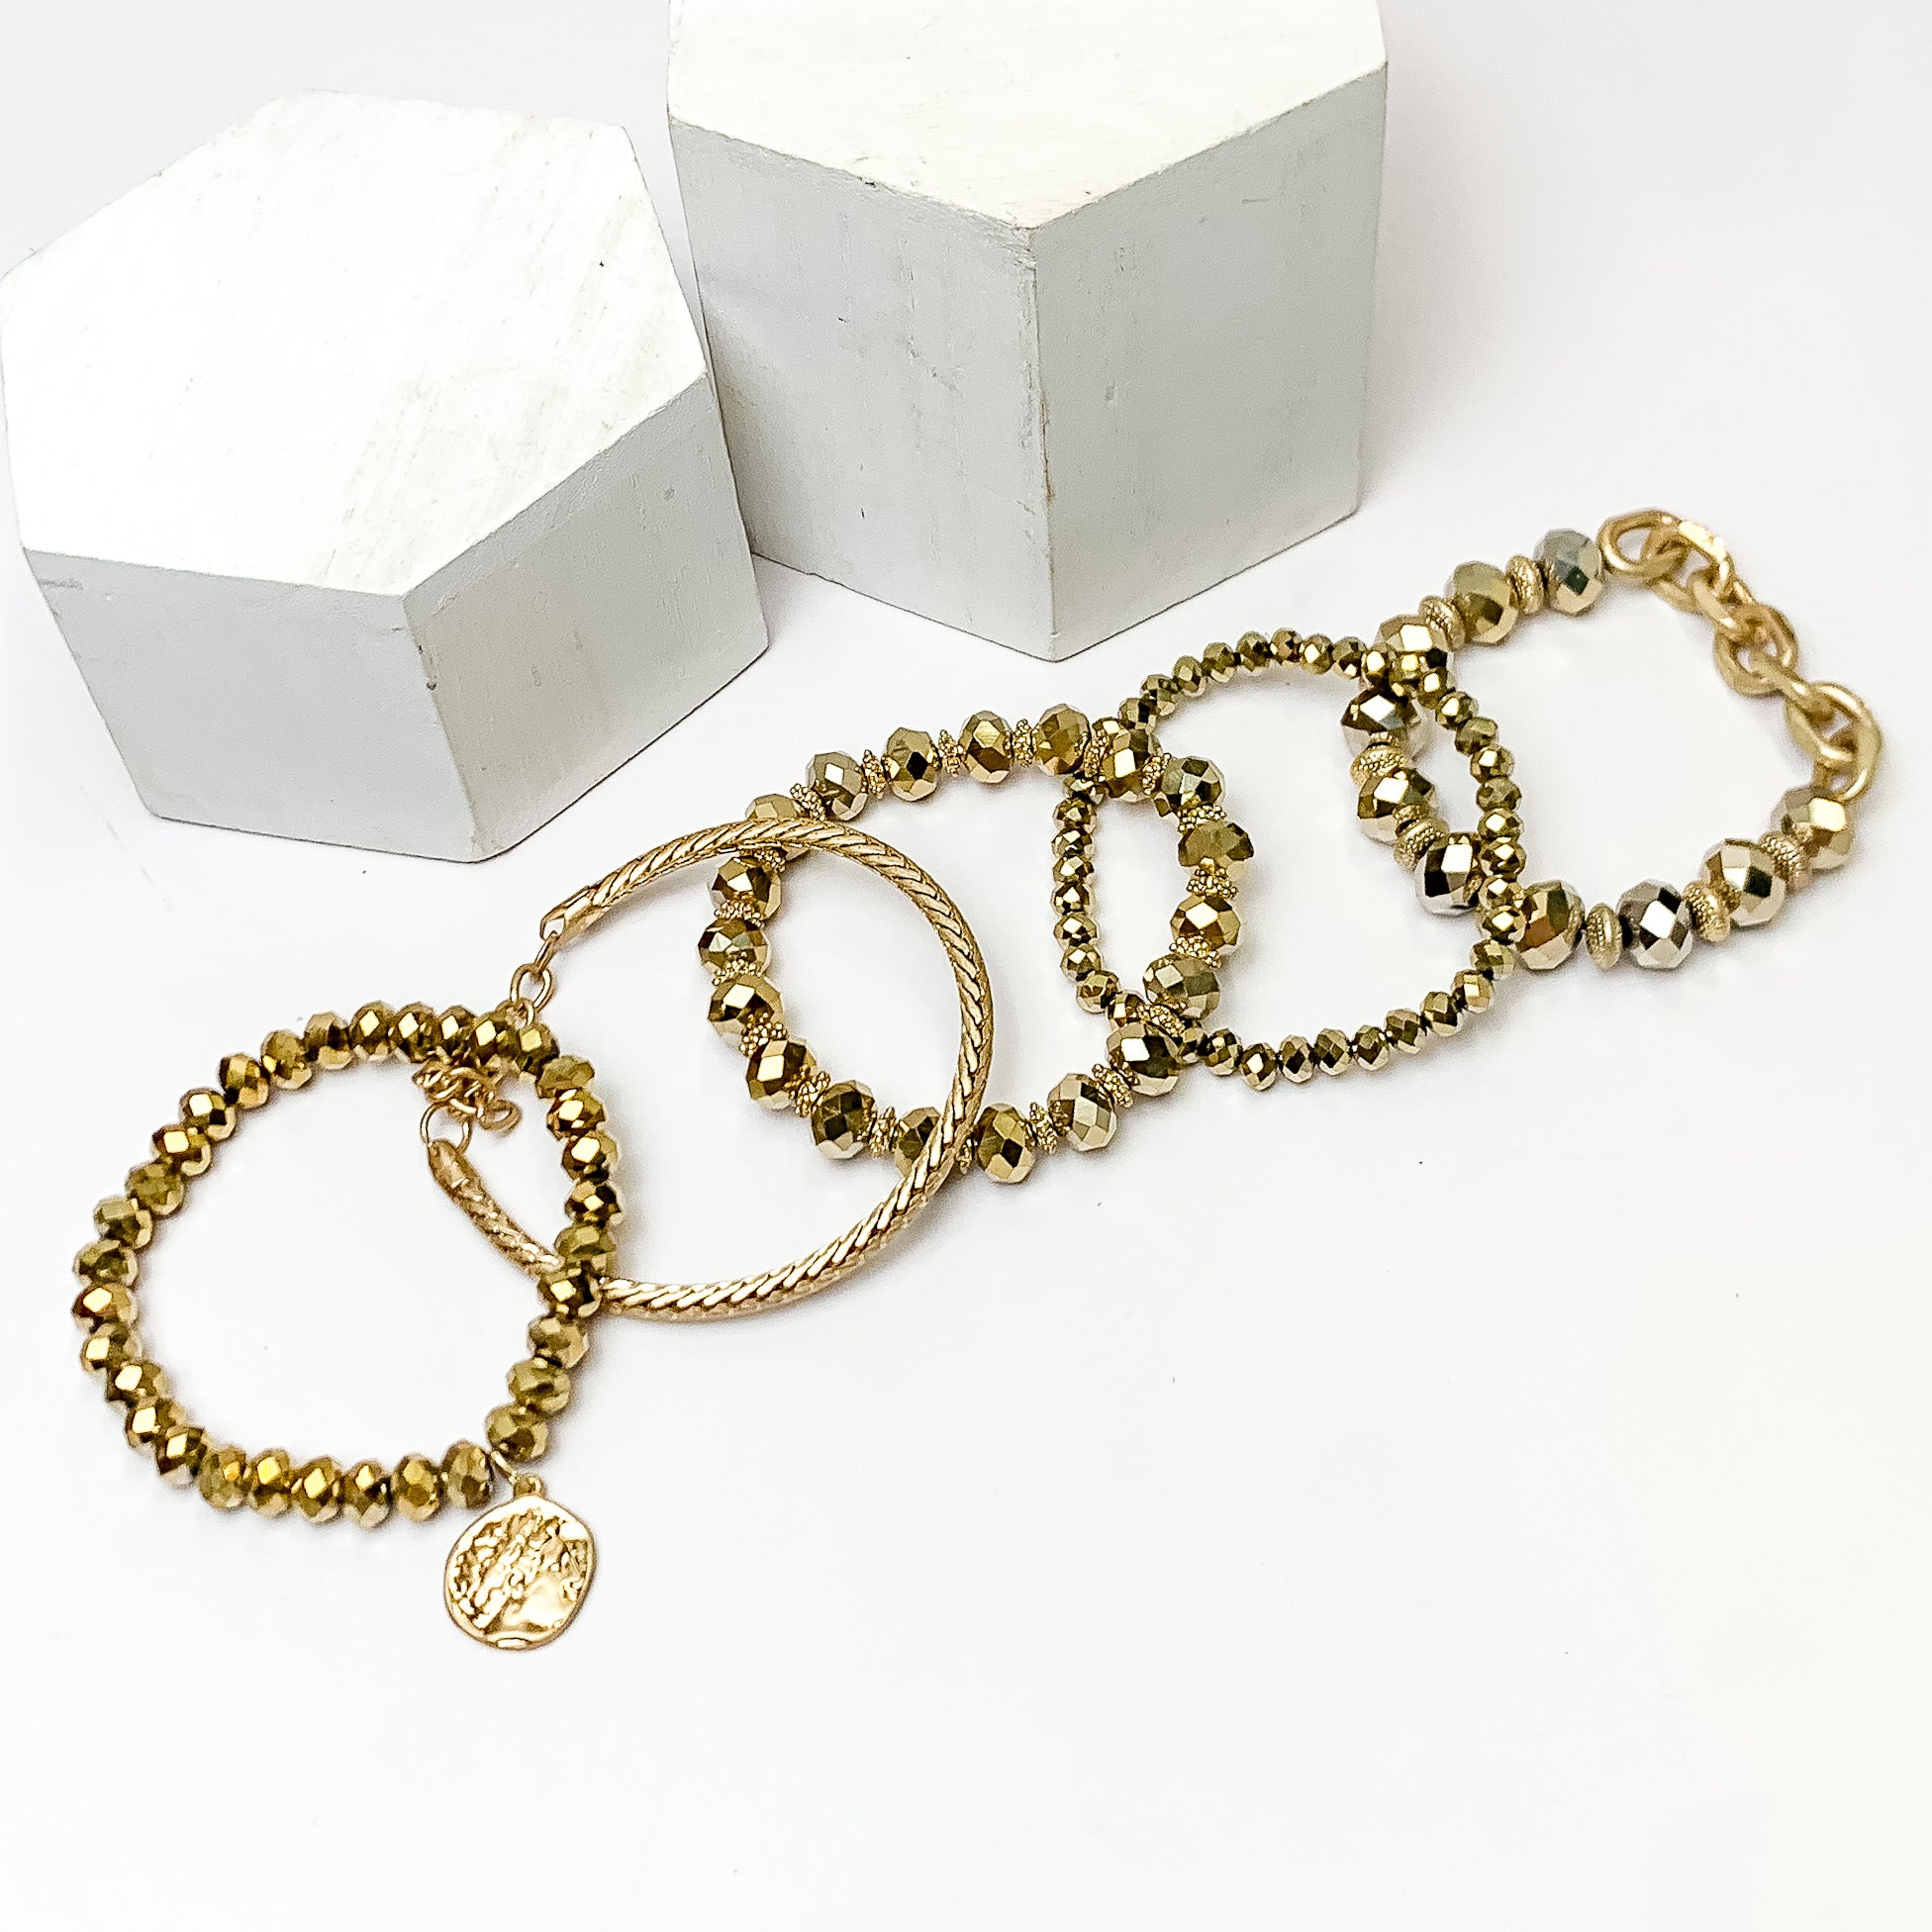 Set of Five | City Dreamer Gold Tone Bracelet Set. Pictured on a white background with two white podiums behind the bracelets.